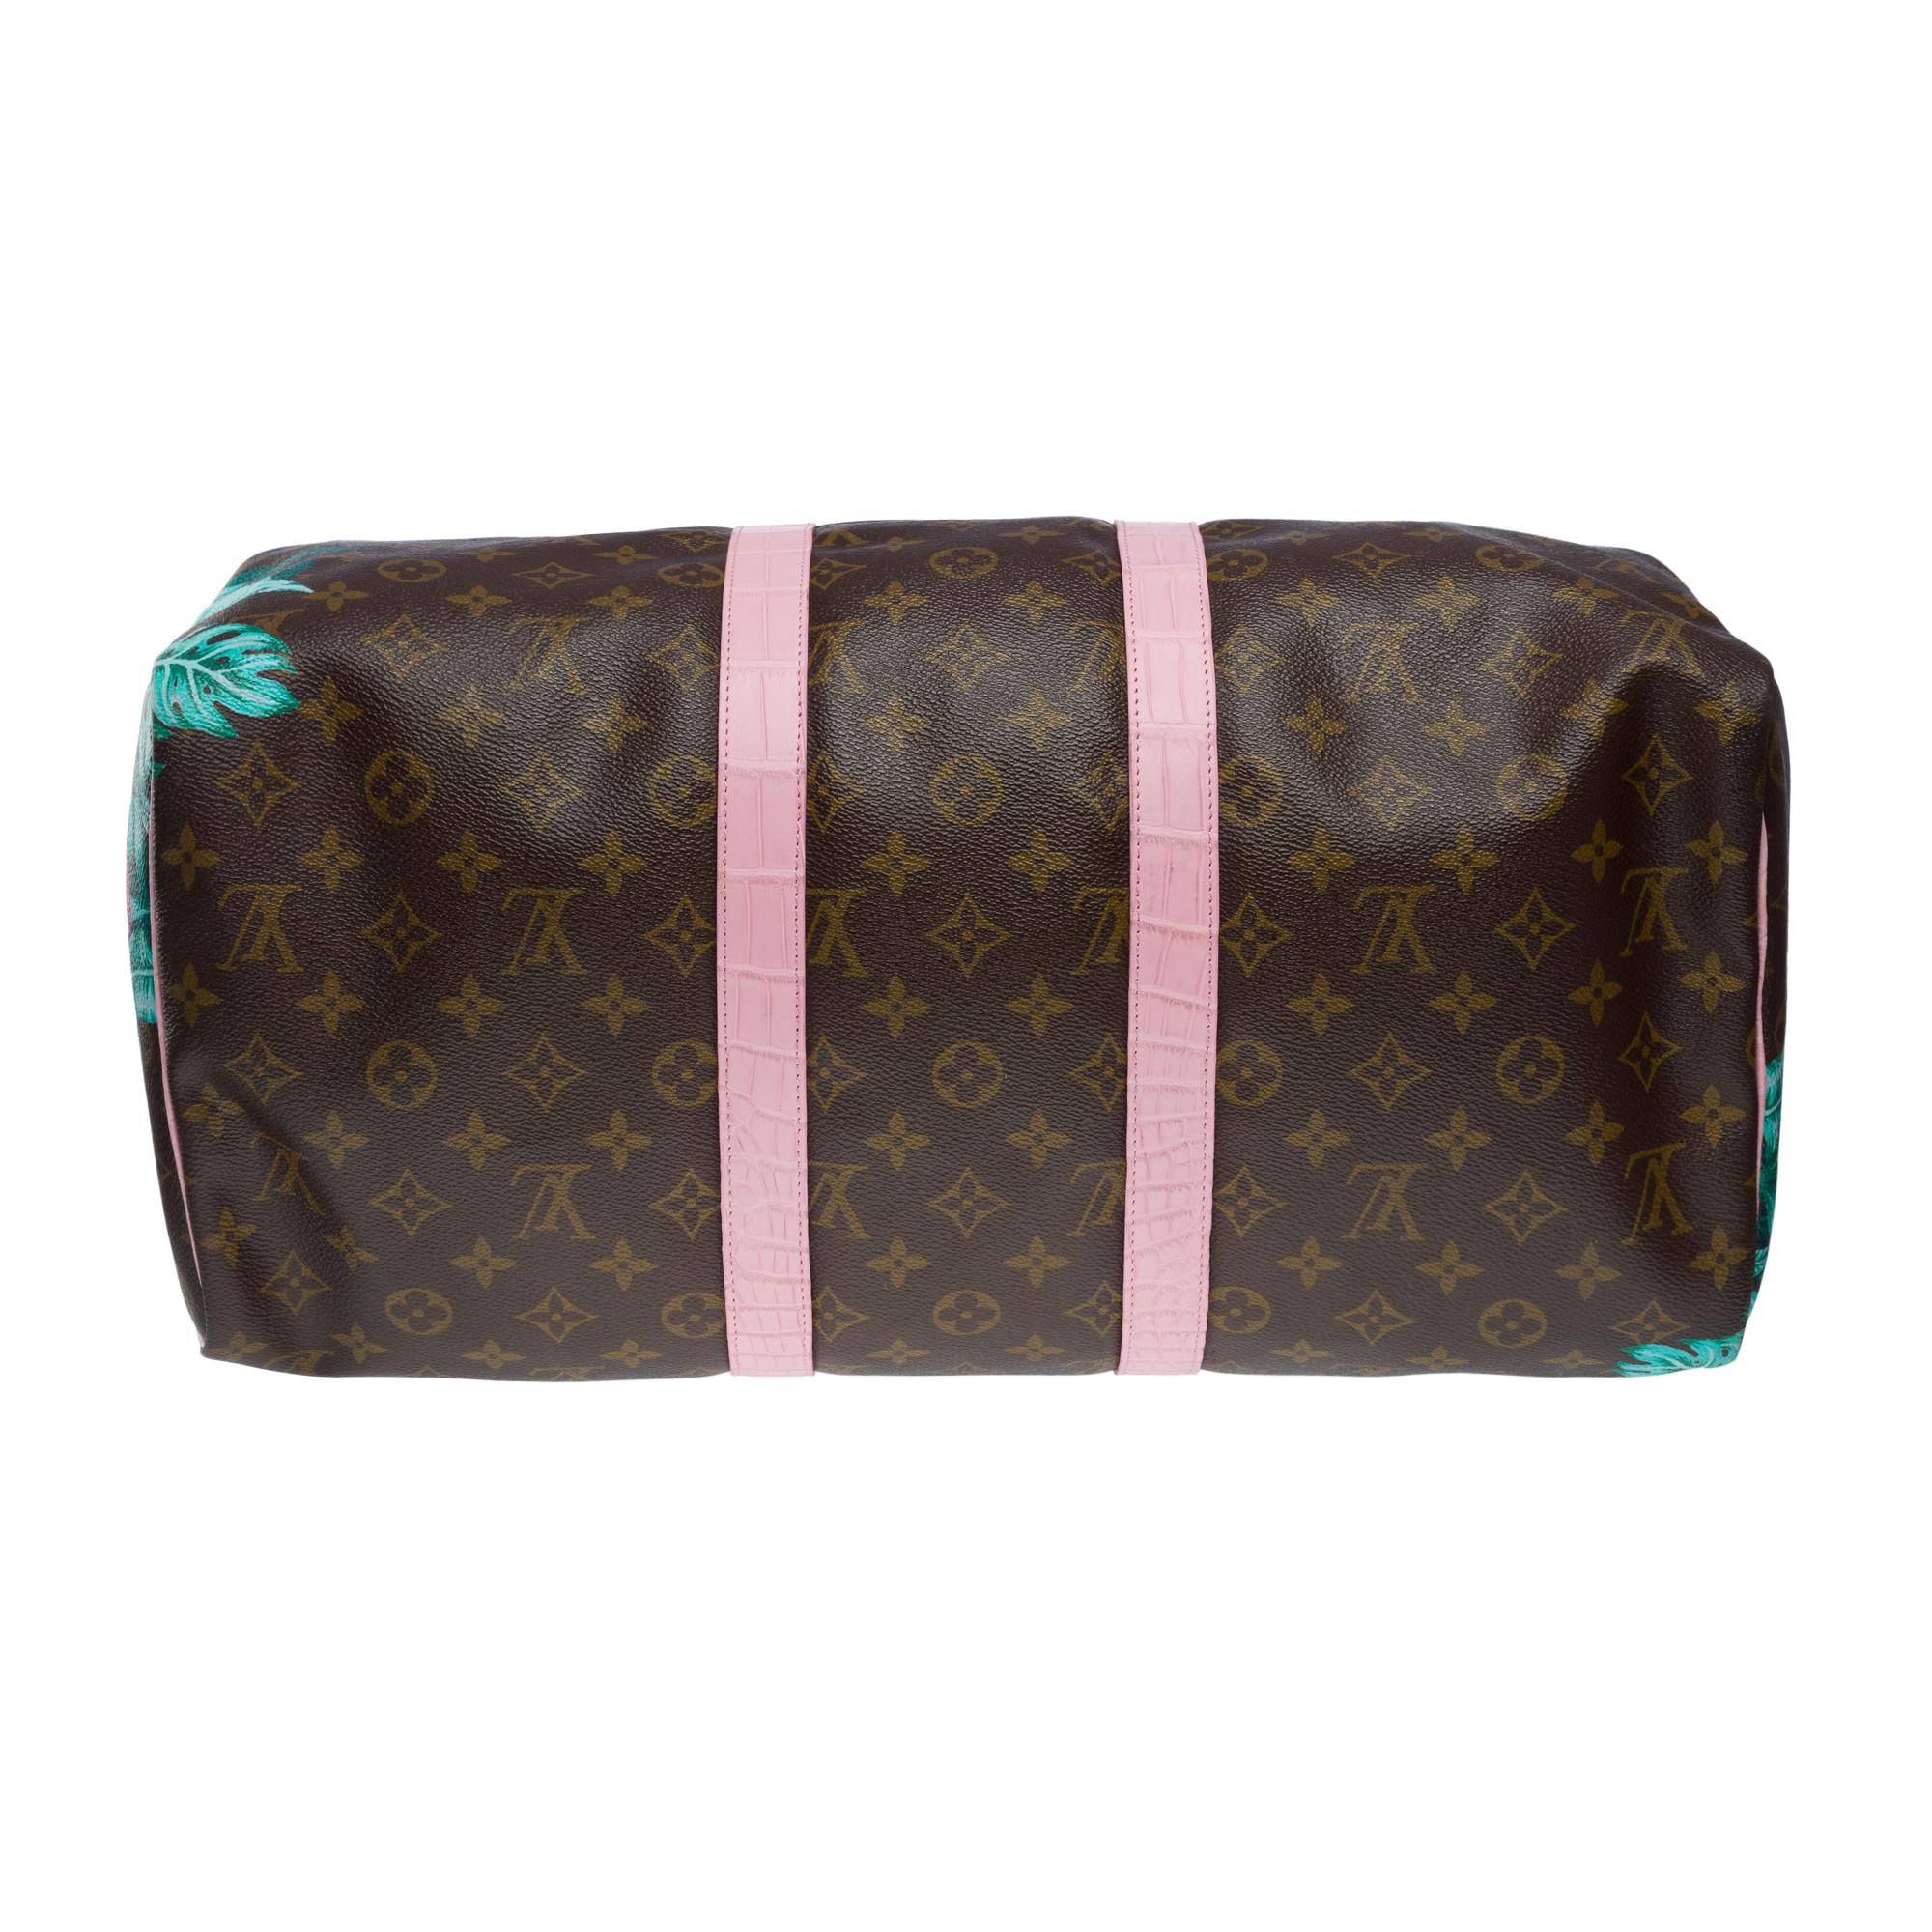 Customized Louis Vuitton Keepall 45 Travel bag with Pink Crocodile leather For Sale 5